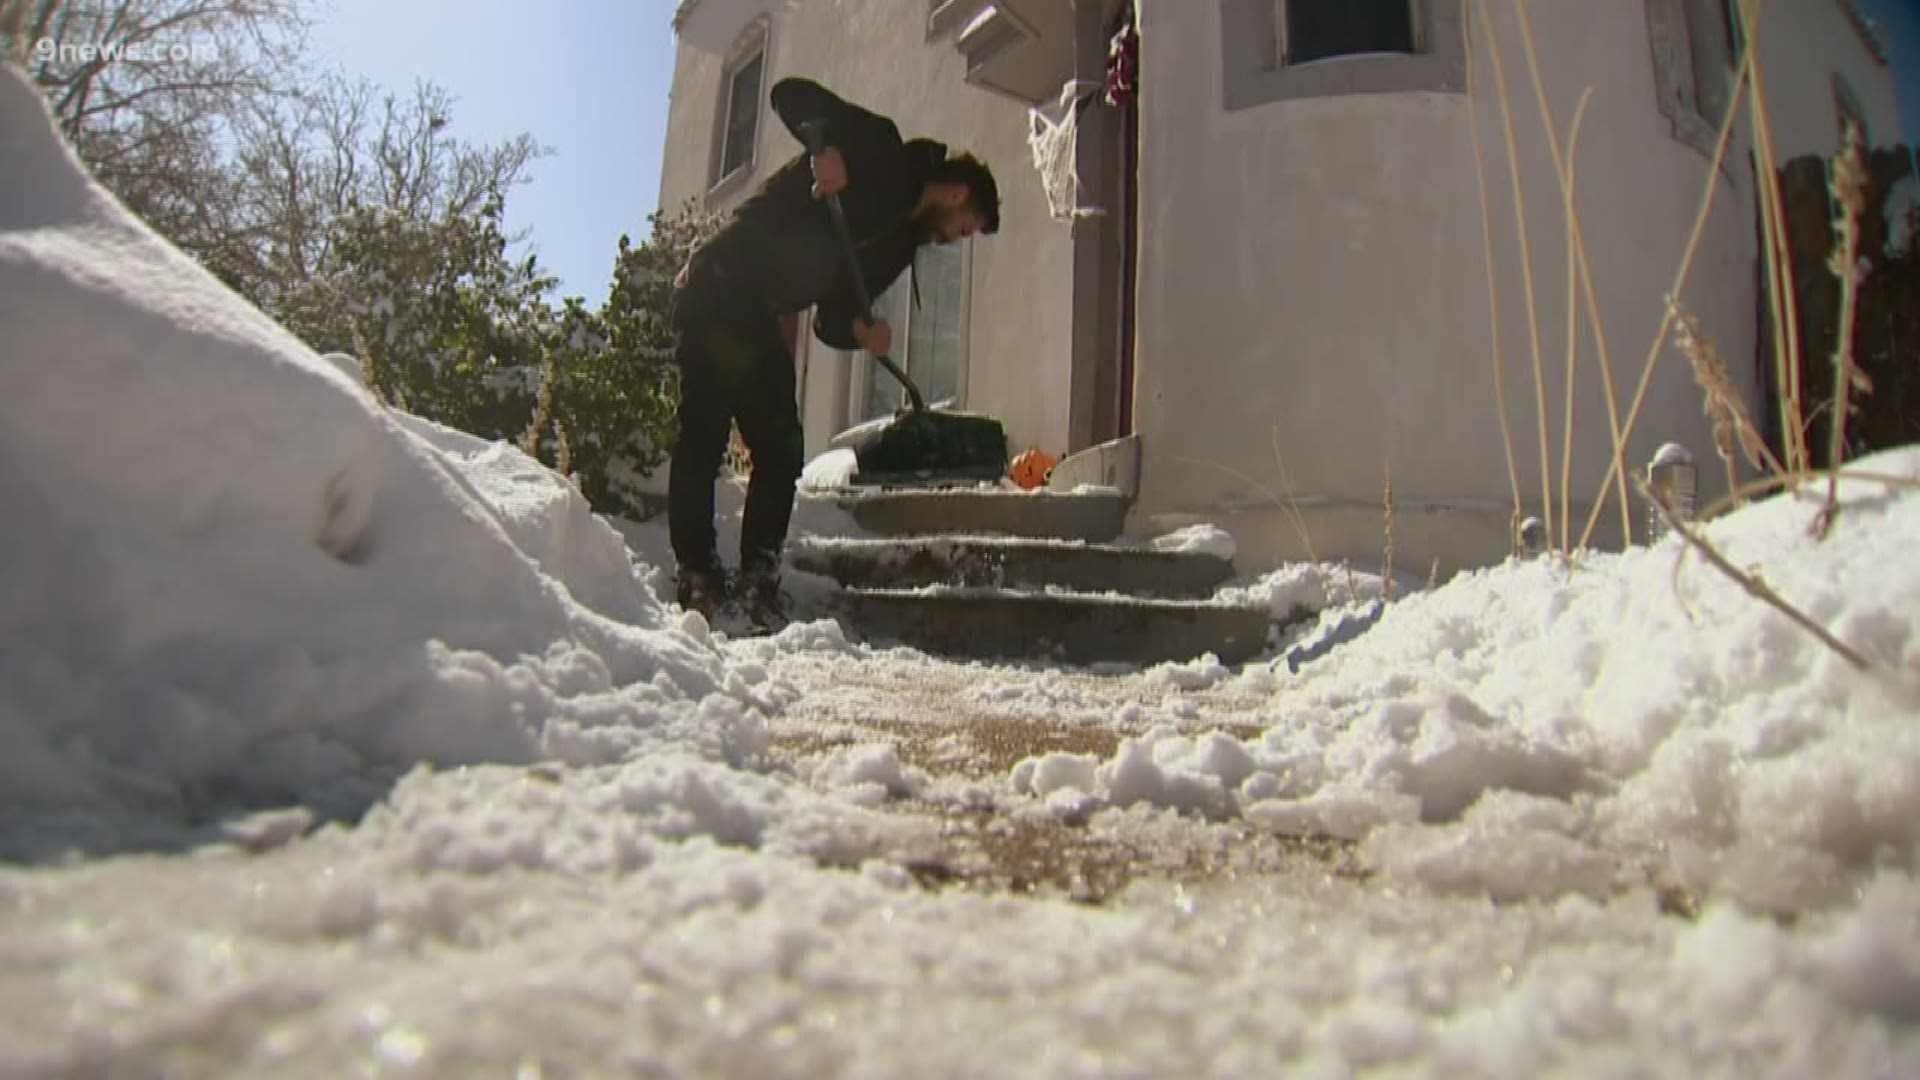 With over 3,000 miles of sidewalks, Denver is counting on residents to shovel their sidewalks.